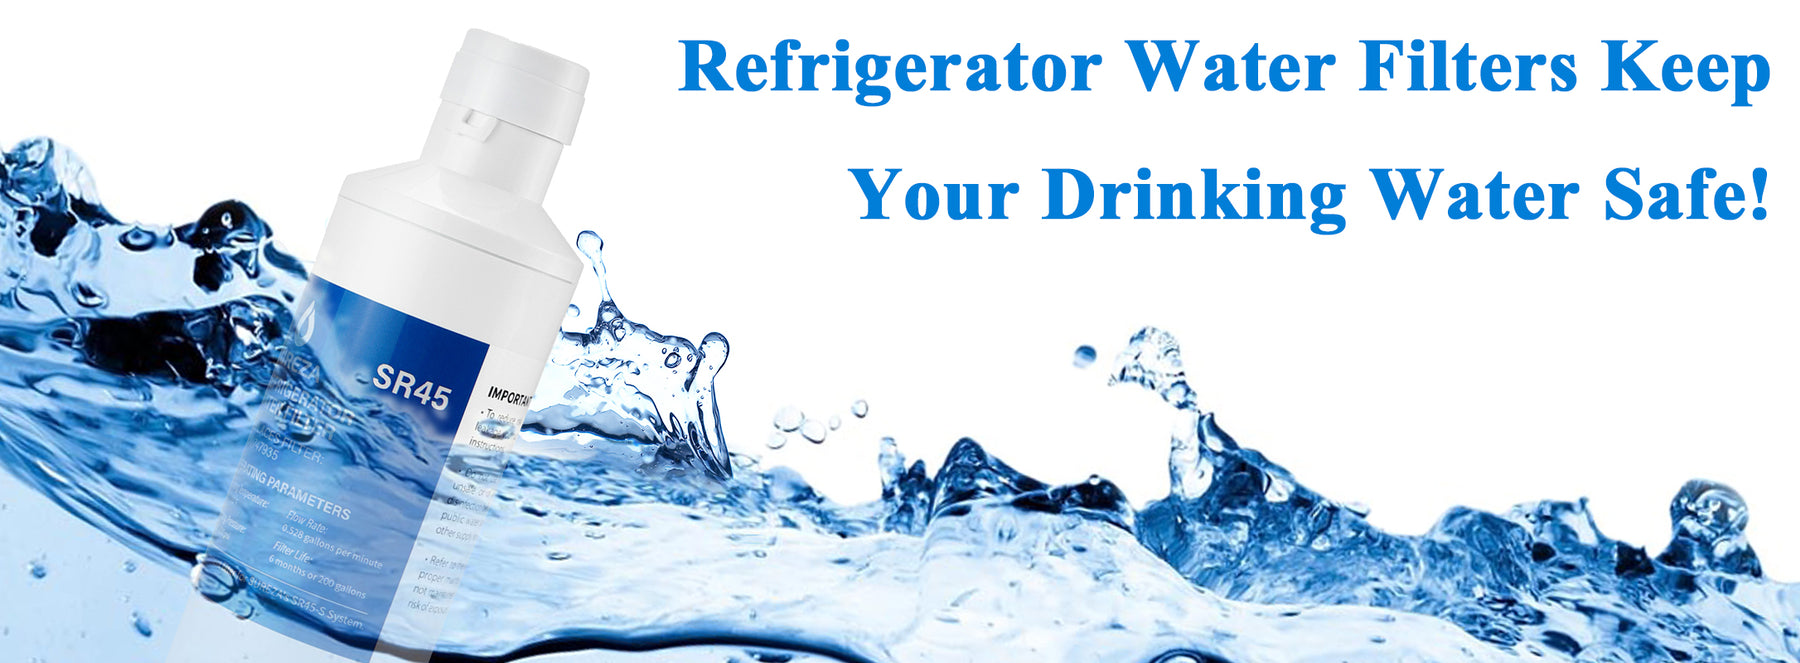 Refrigerator water filters provide you with healthier water!